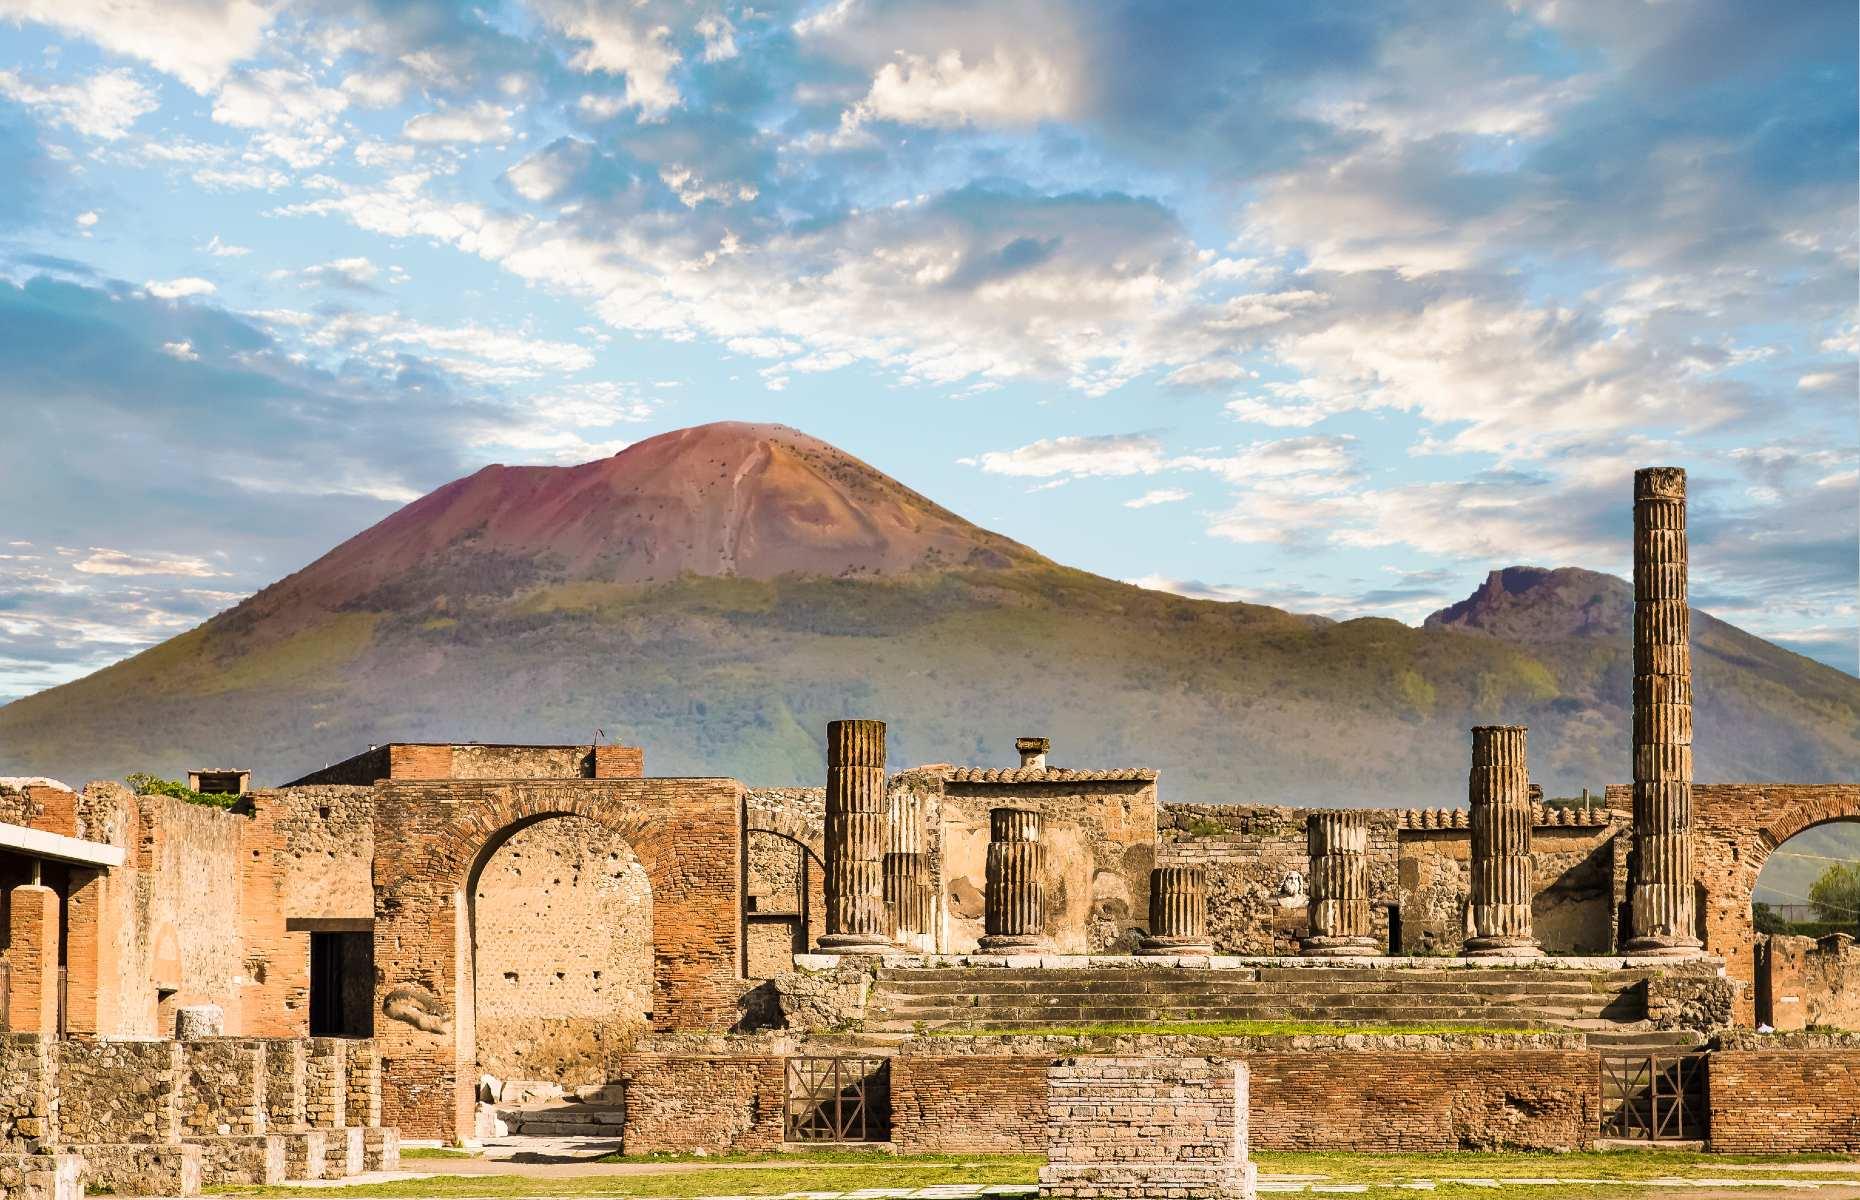 <p>The year's rail renaissance continues with Italian national rail operator Trenitalia opening up a plethora of new opportunities. First, its Frecciarossa (Red Arrow) bullet trains now whizz passengers from Rome to the ruined city of Pompeii (pictured), which was buried under volcanic ash after Mount Vesuvius erupted in 79 AD. The service runs every Sunday and on selected public holidays, with the journey from A to B taking less than two hours.</p>